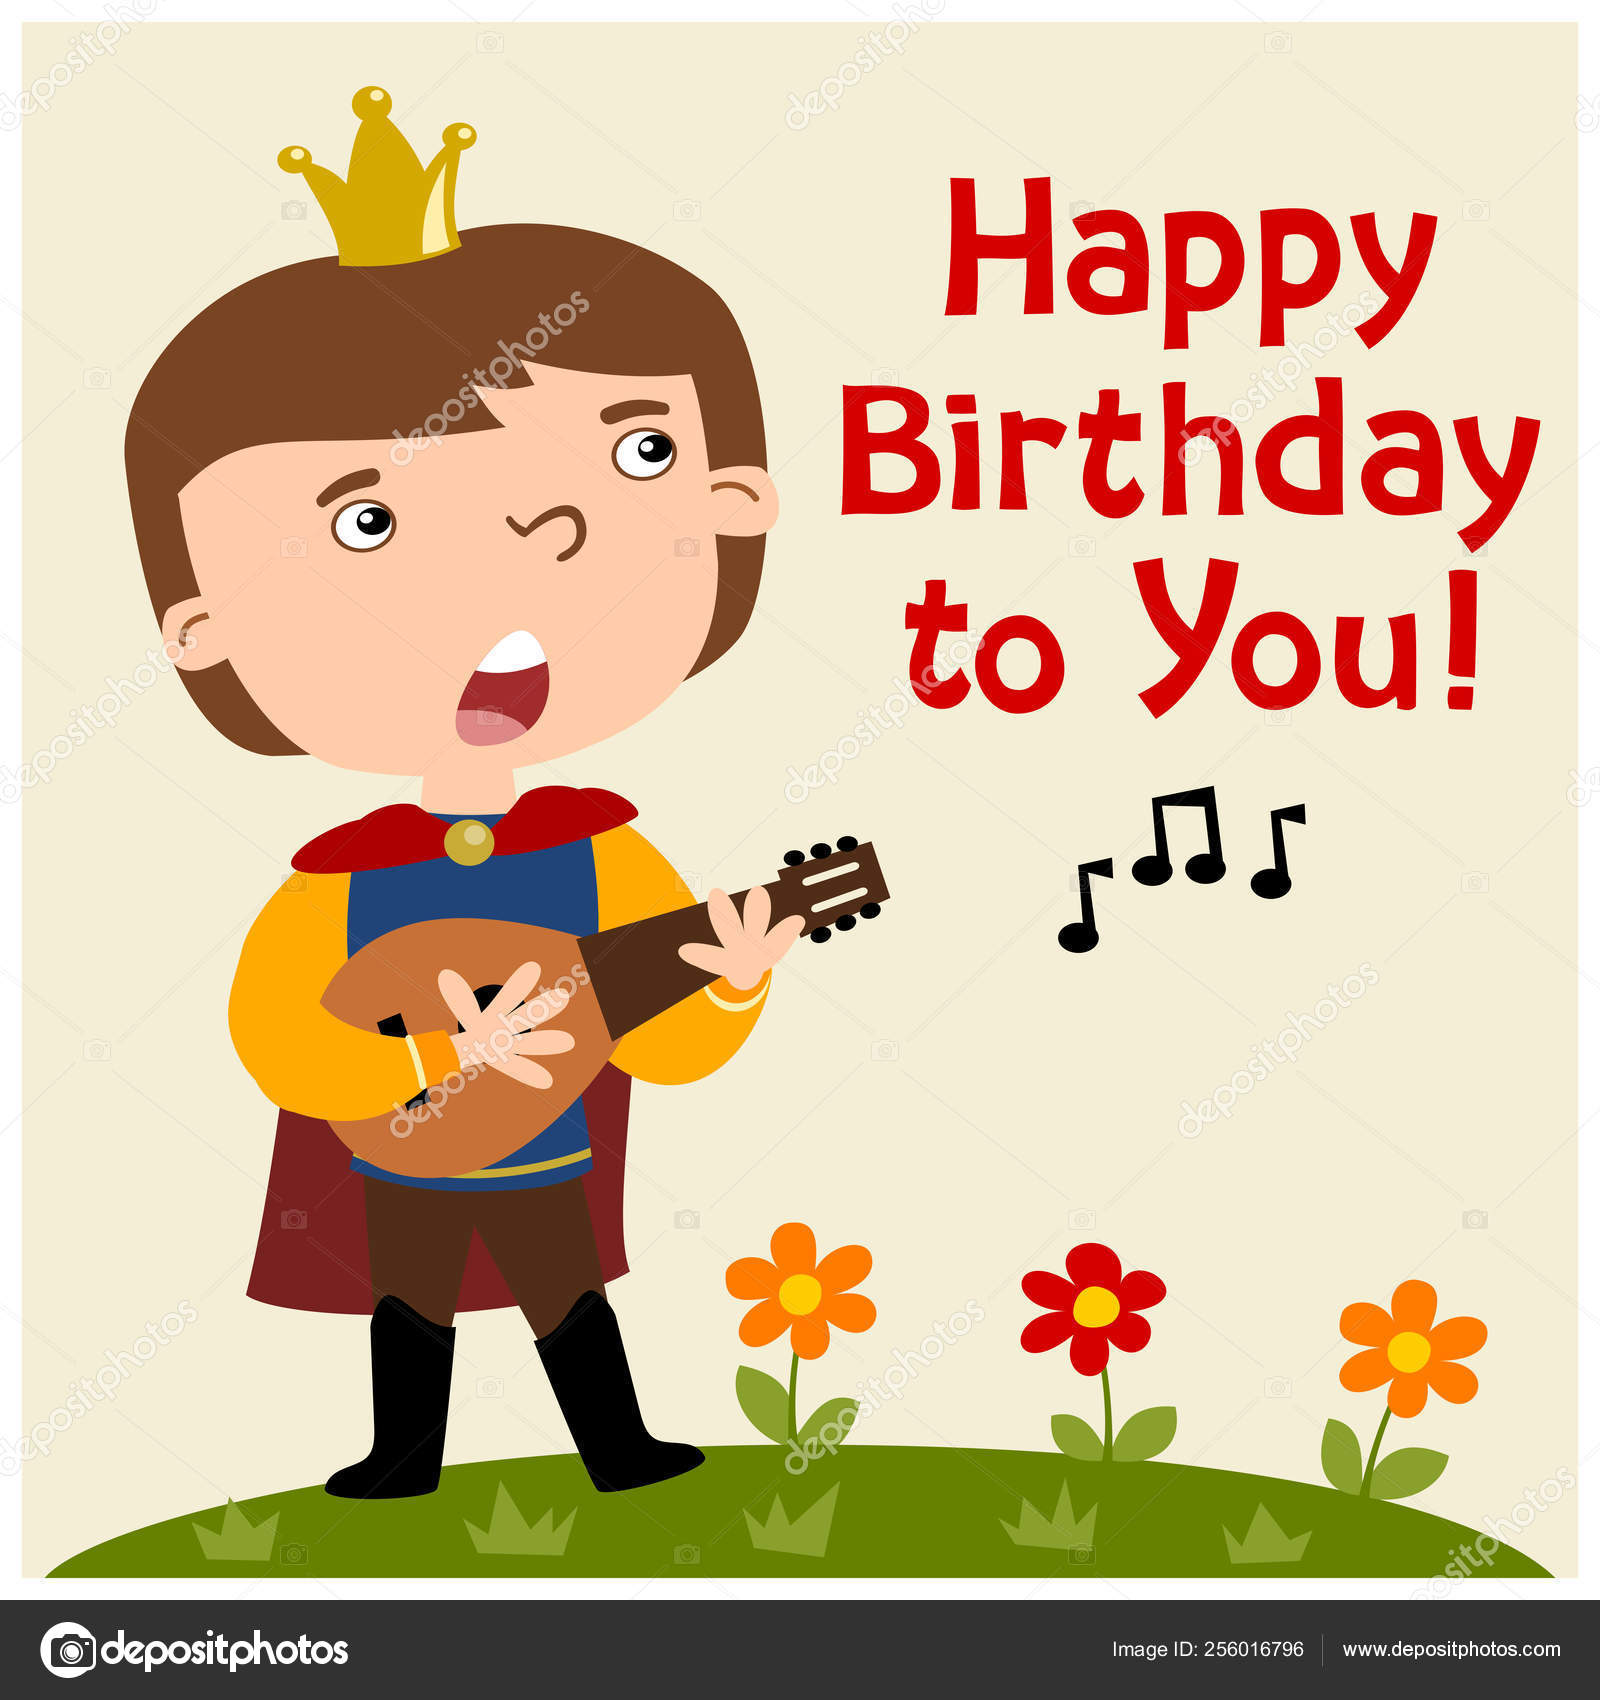 Happy birthday card with cartoon character of funny prince with crown on  head playing lute and singing song Happy Birthday to You on summer meadow